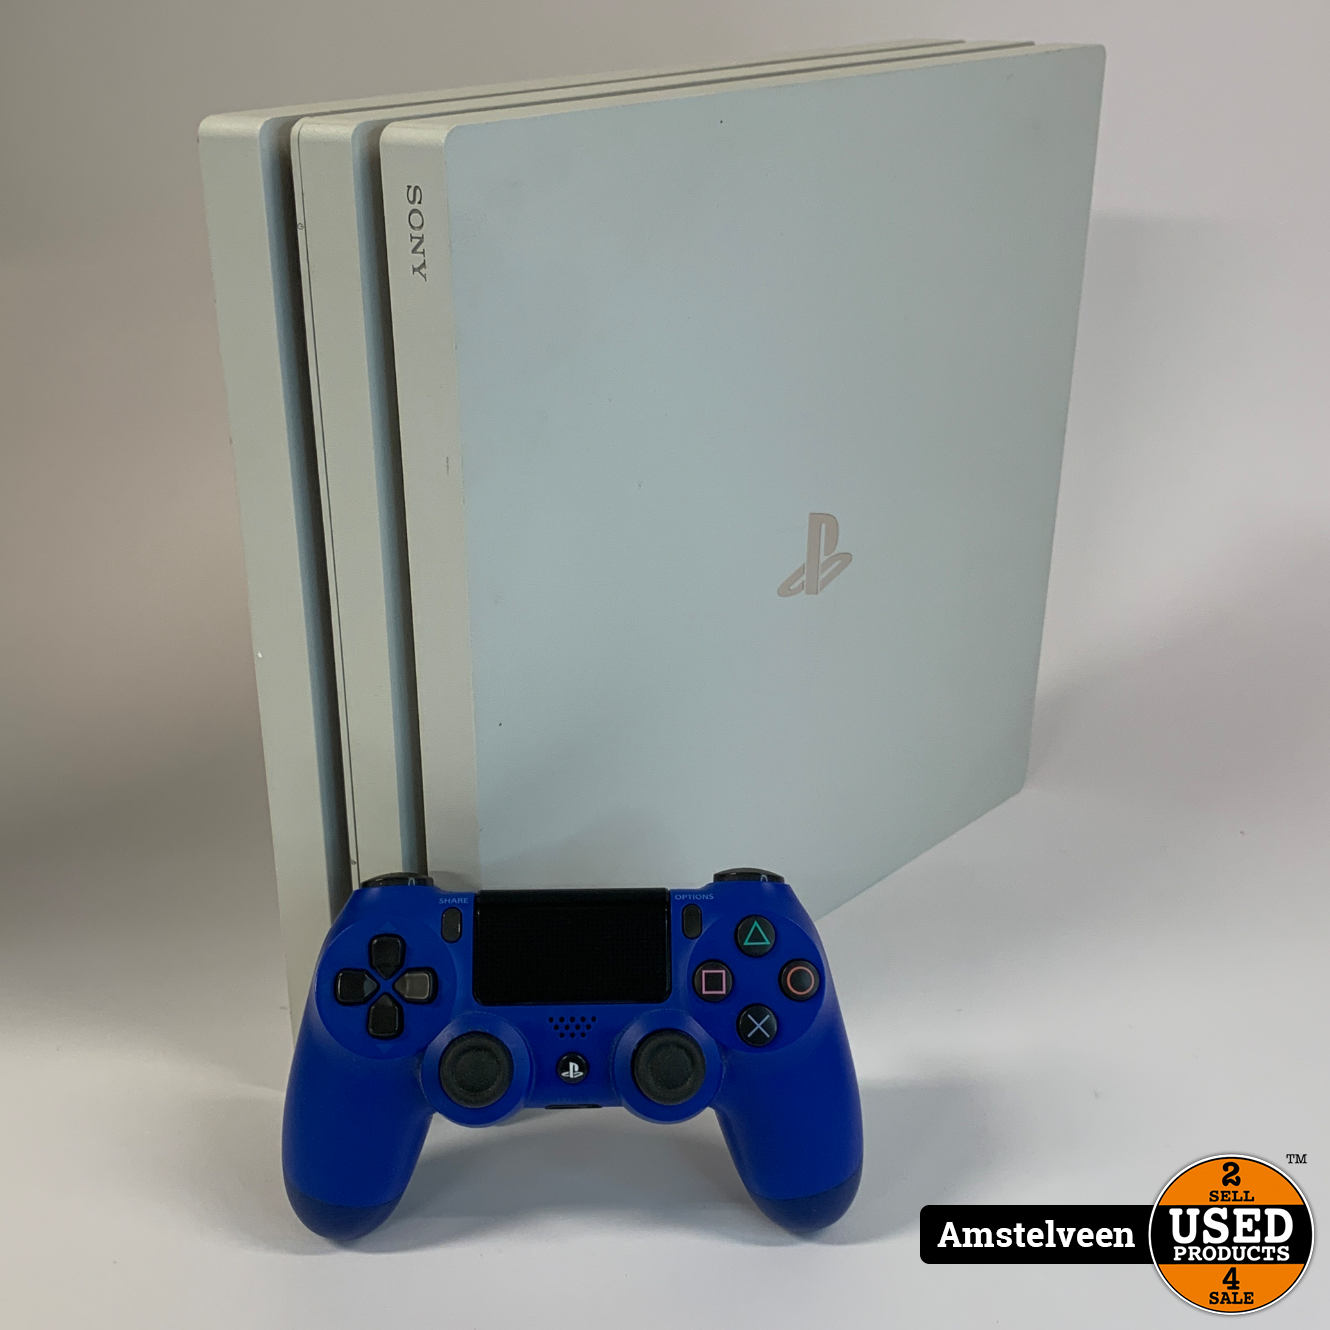 Civic poort flauw Sony Playstation 4 Pro 1TB White | Nette Staat - Used Products Amstelveen